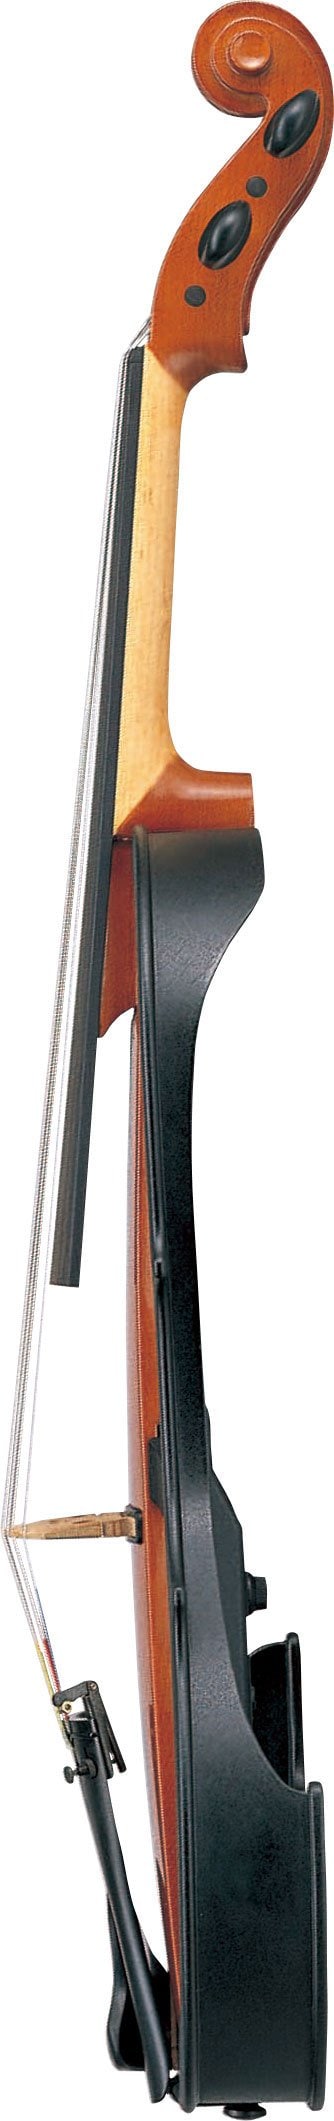 SVV200 - Overview - Silent™ Series Violins, Violas, Cellos, and